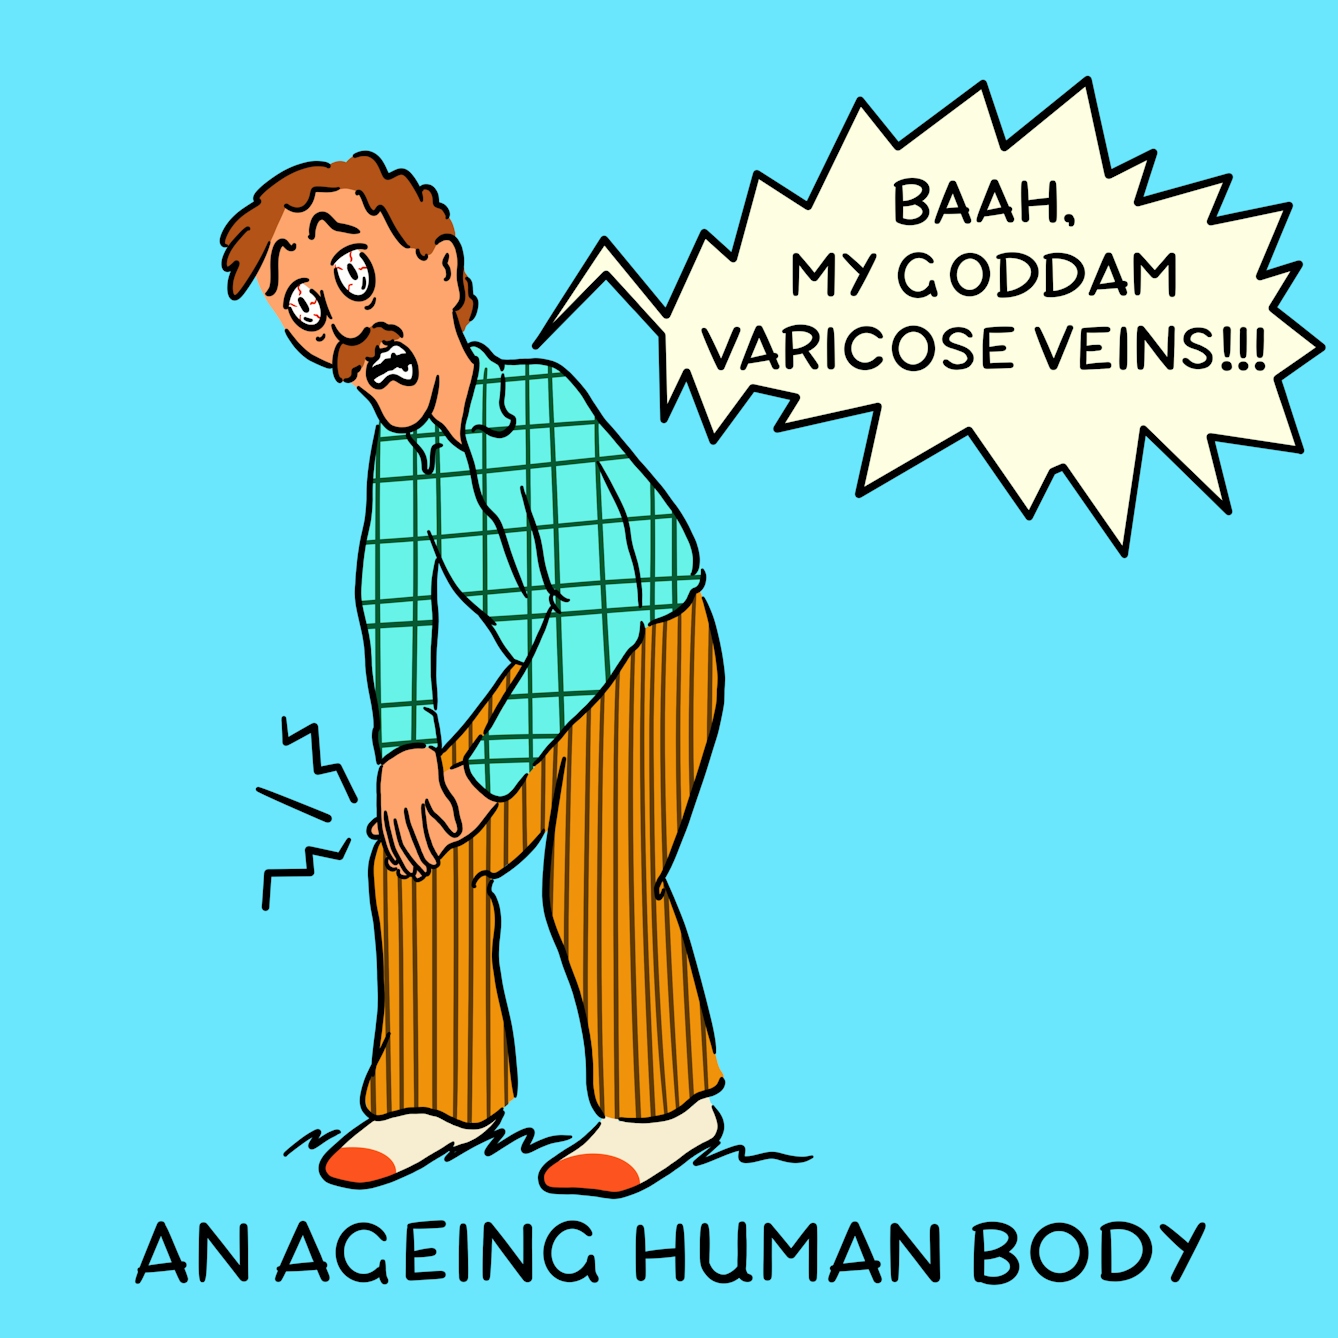 Panel 4 of a four-panel comic drawn digitally: a man with a plaid shirt, moustache, and bloodshot eyes clutches his right knee and exclaims "Baah, my goddam varicose veins!!!". The caption text reads "An ageing human body"